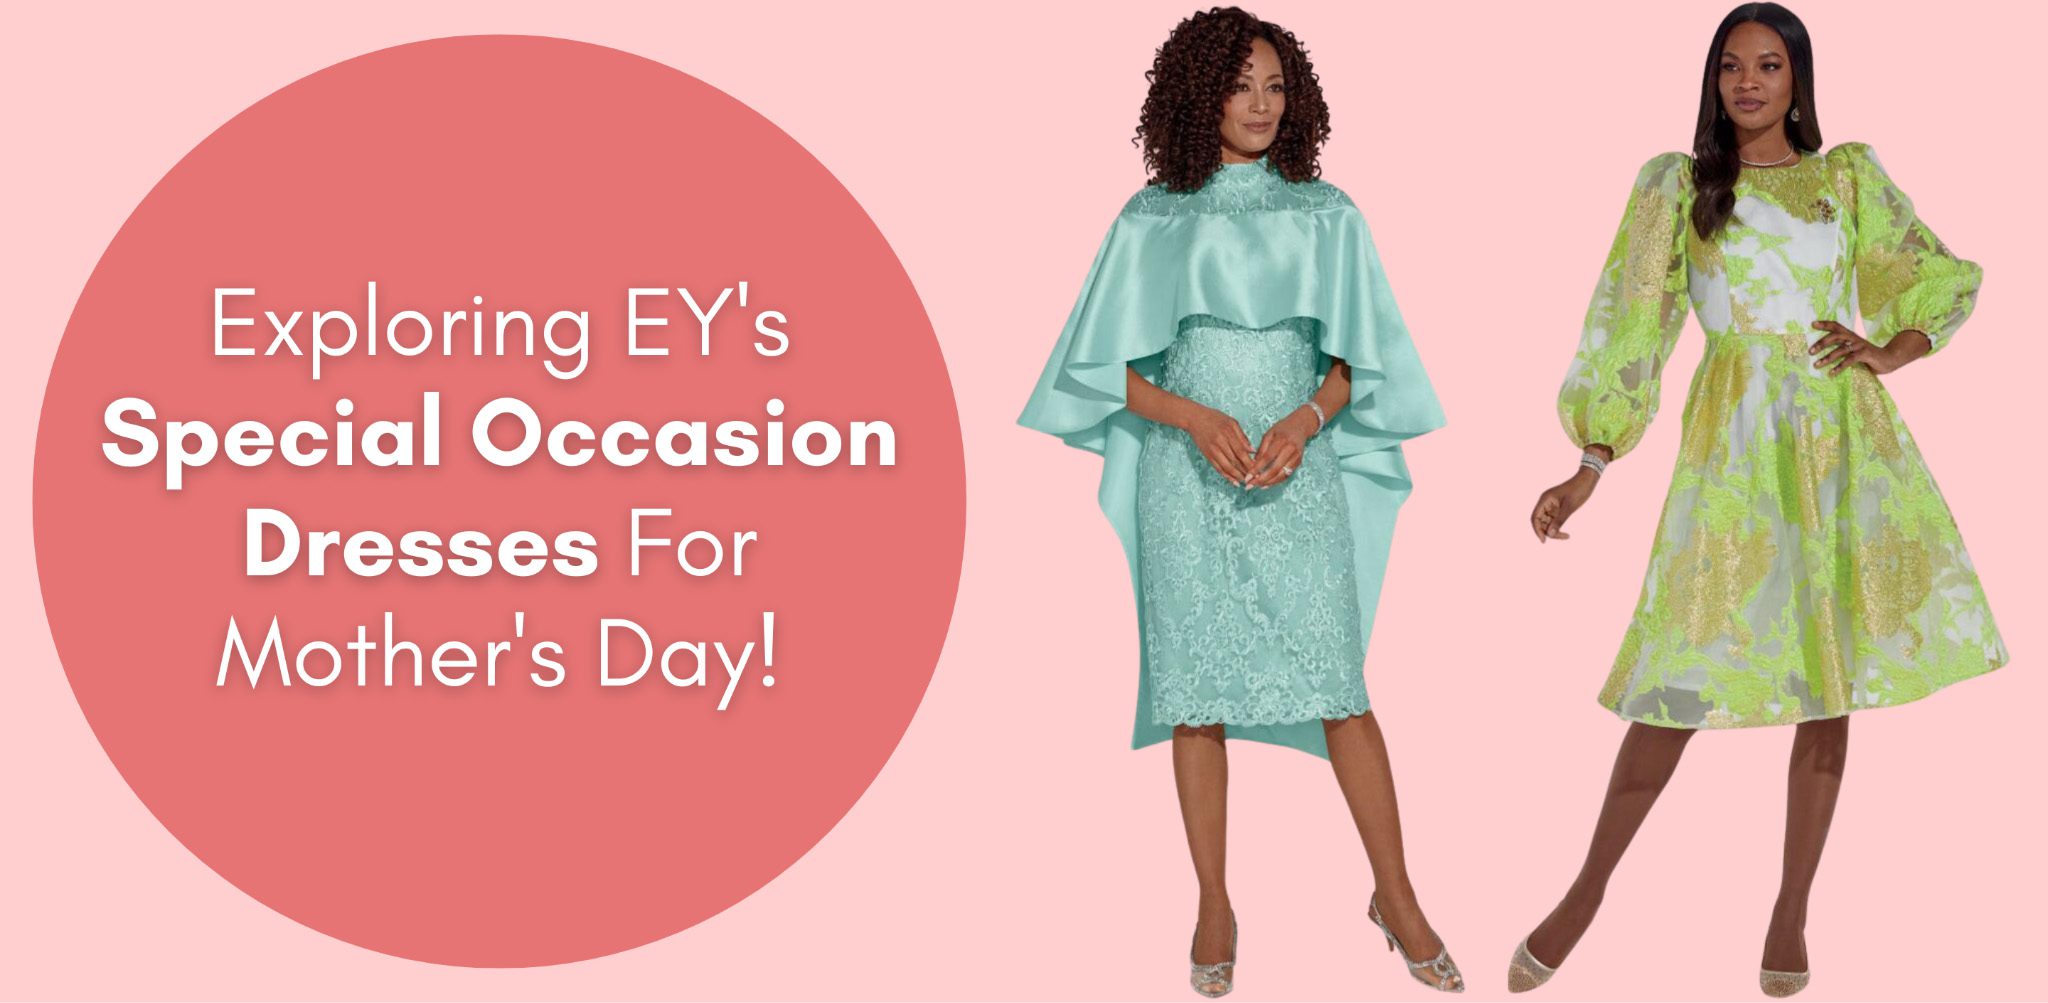 Exploring EY’s Special Occasion Dresses For Mother’s Day!